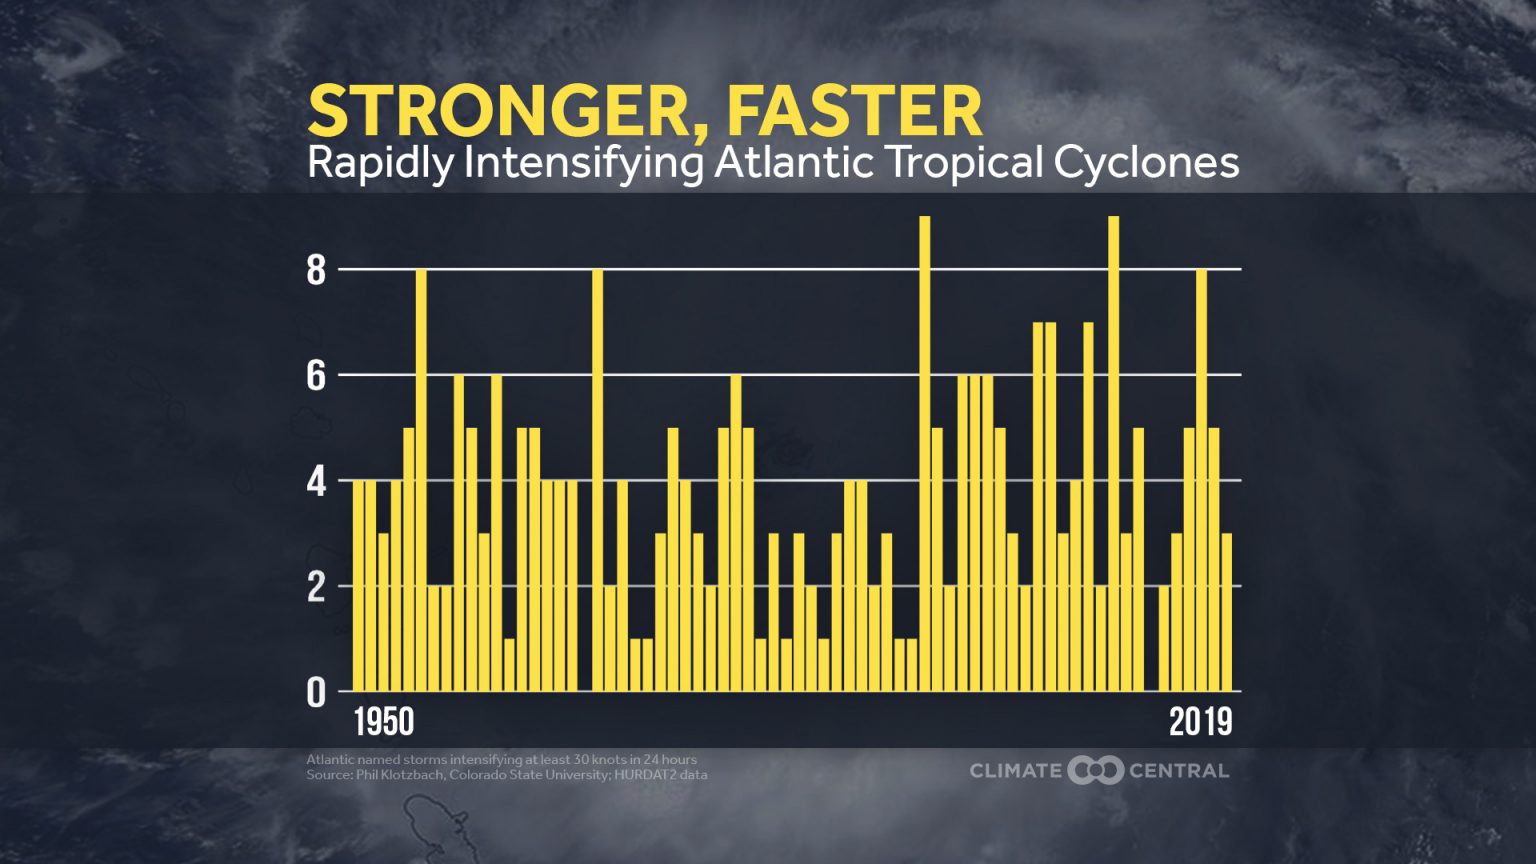 Earth’s Forecast Hurricanes and Climate Change Exhibits